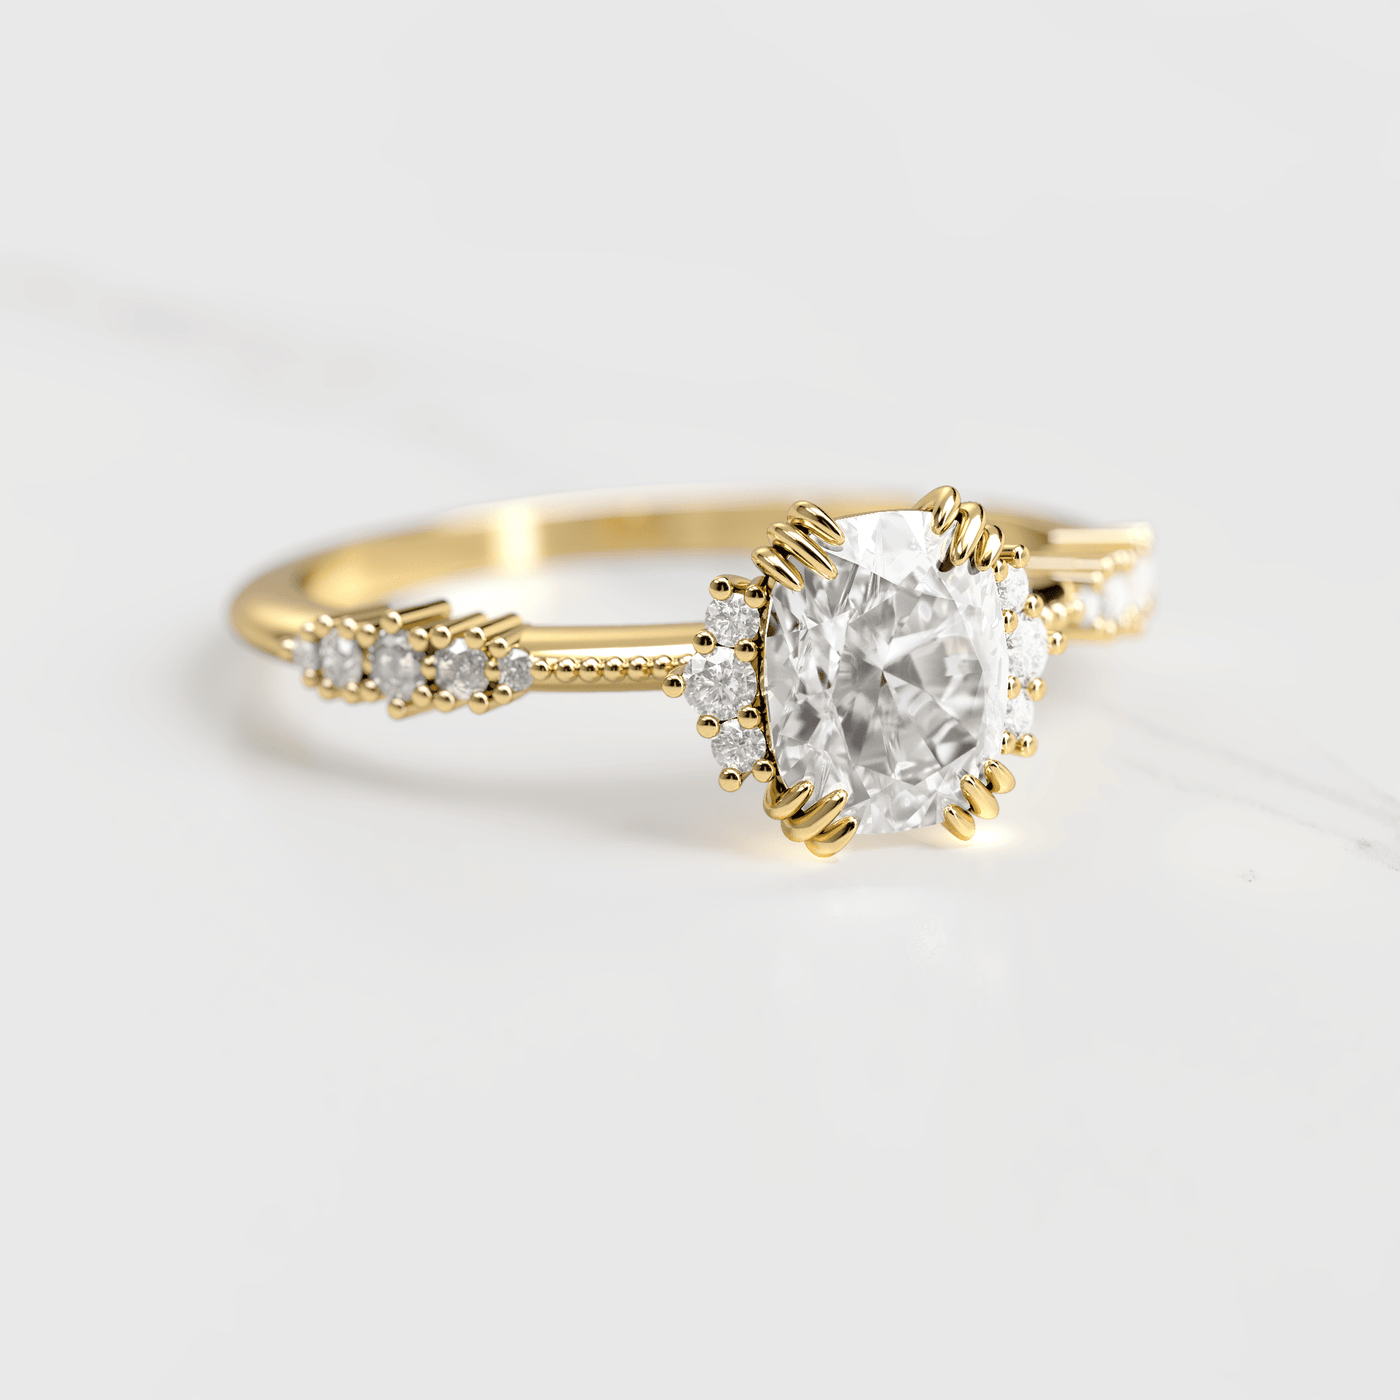 Unique Cushion-Cut White Diamond Engagement Prong Ring with Side White Round Diamonds